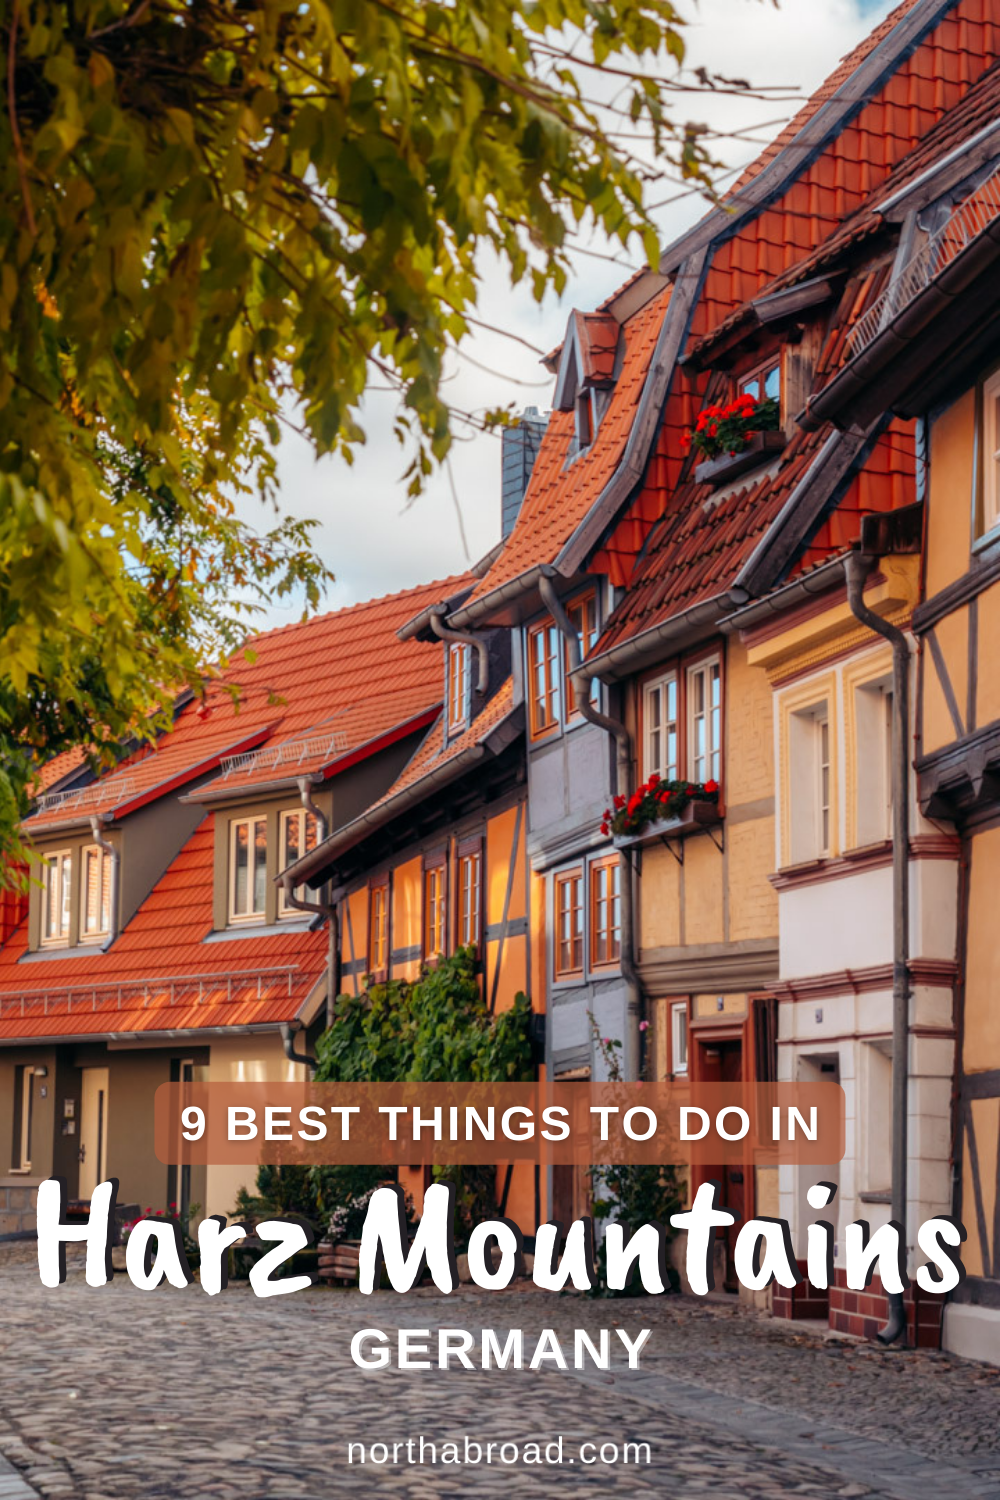 A Complete Travel Guide to the Harz Mountains in Germany: 9 Best Things to Do and See